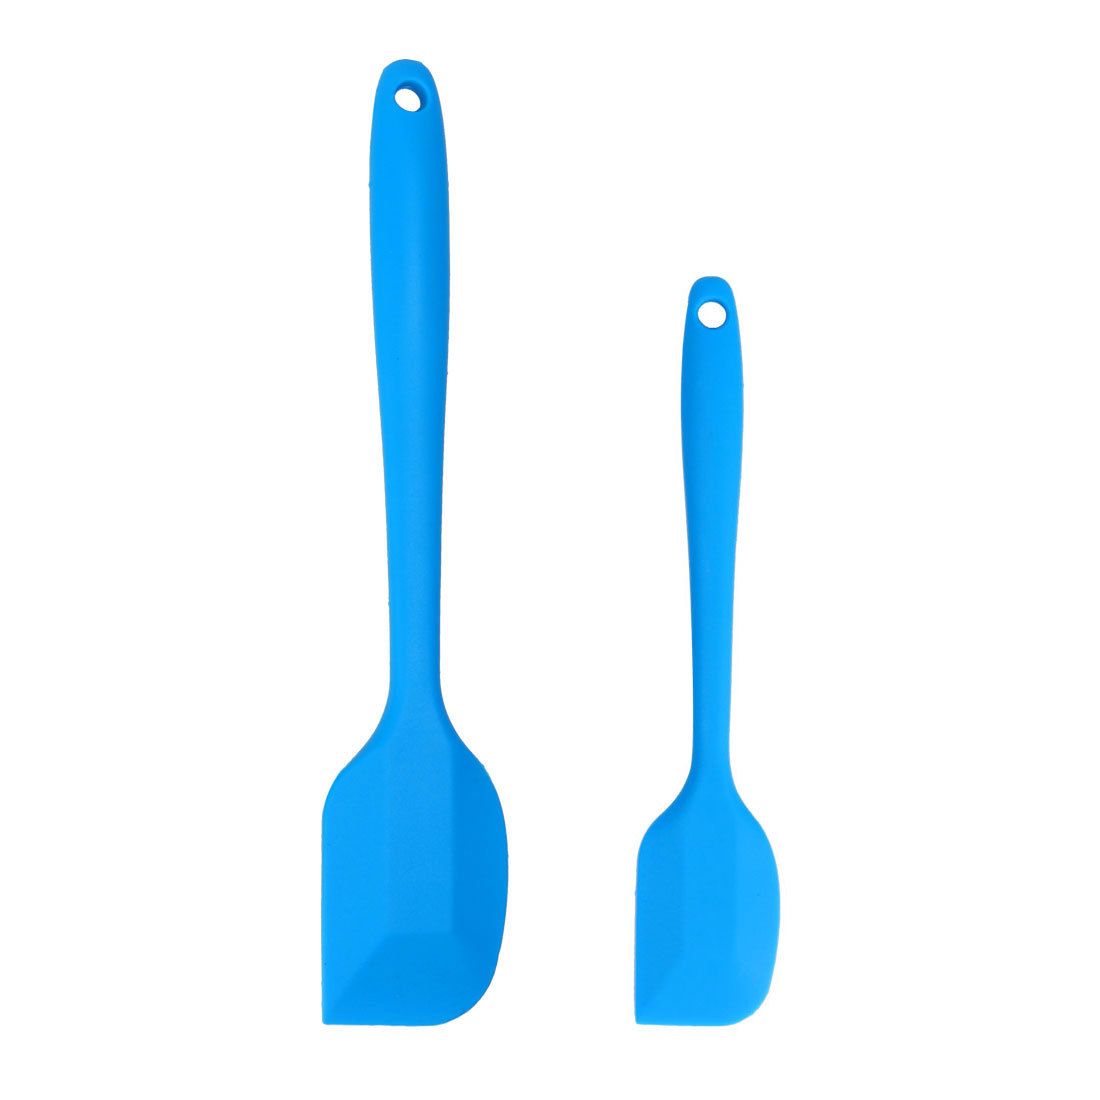 5pcs/set Colorful Silicone Kitchen Cooking Utensils With Stainless Steel  Core, Including Pot, Spatula, Spoon, Baking Mixing Spoon And Shovel